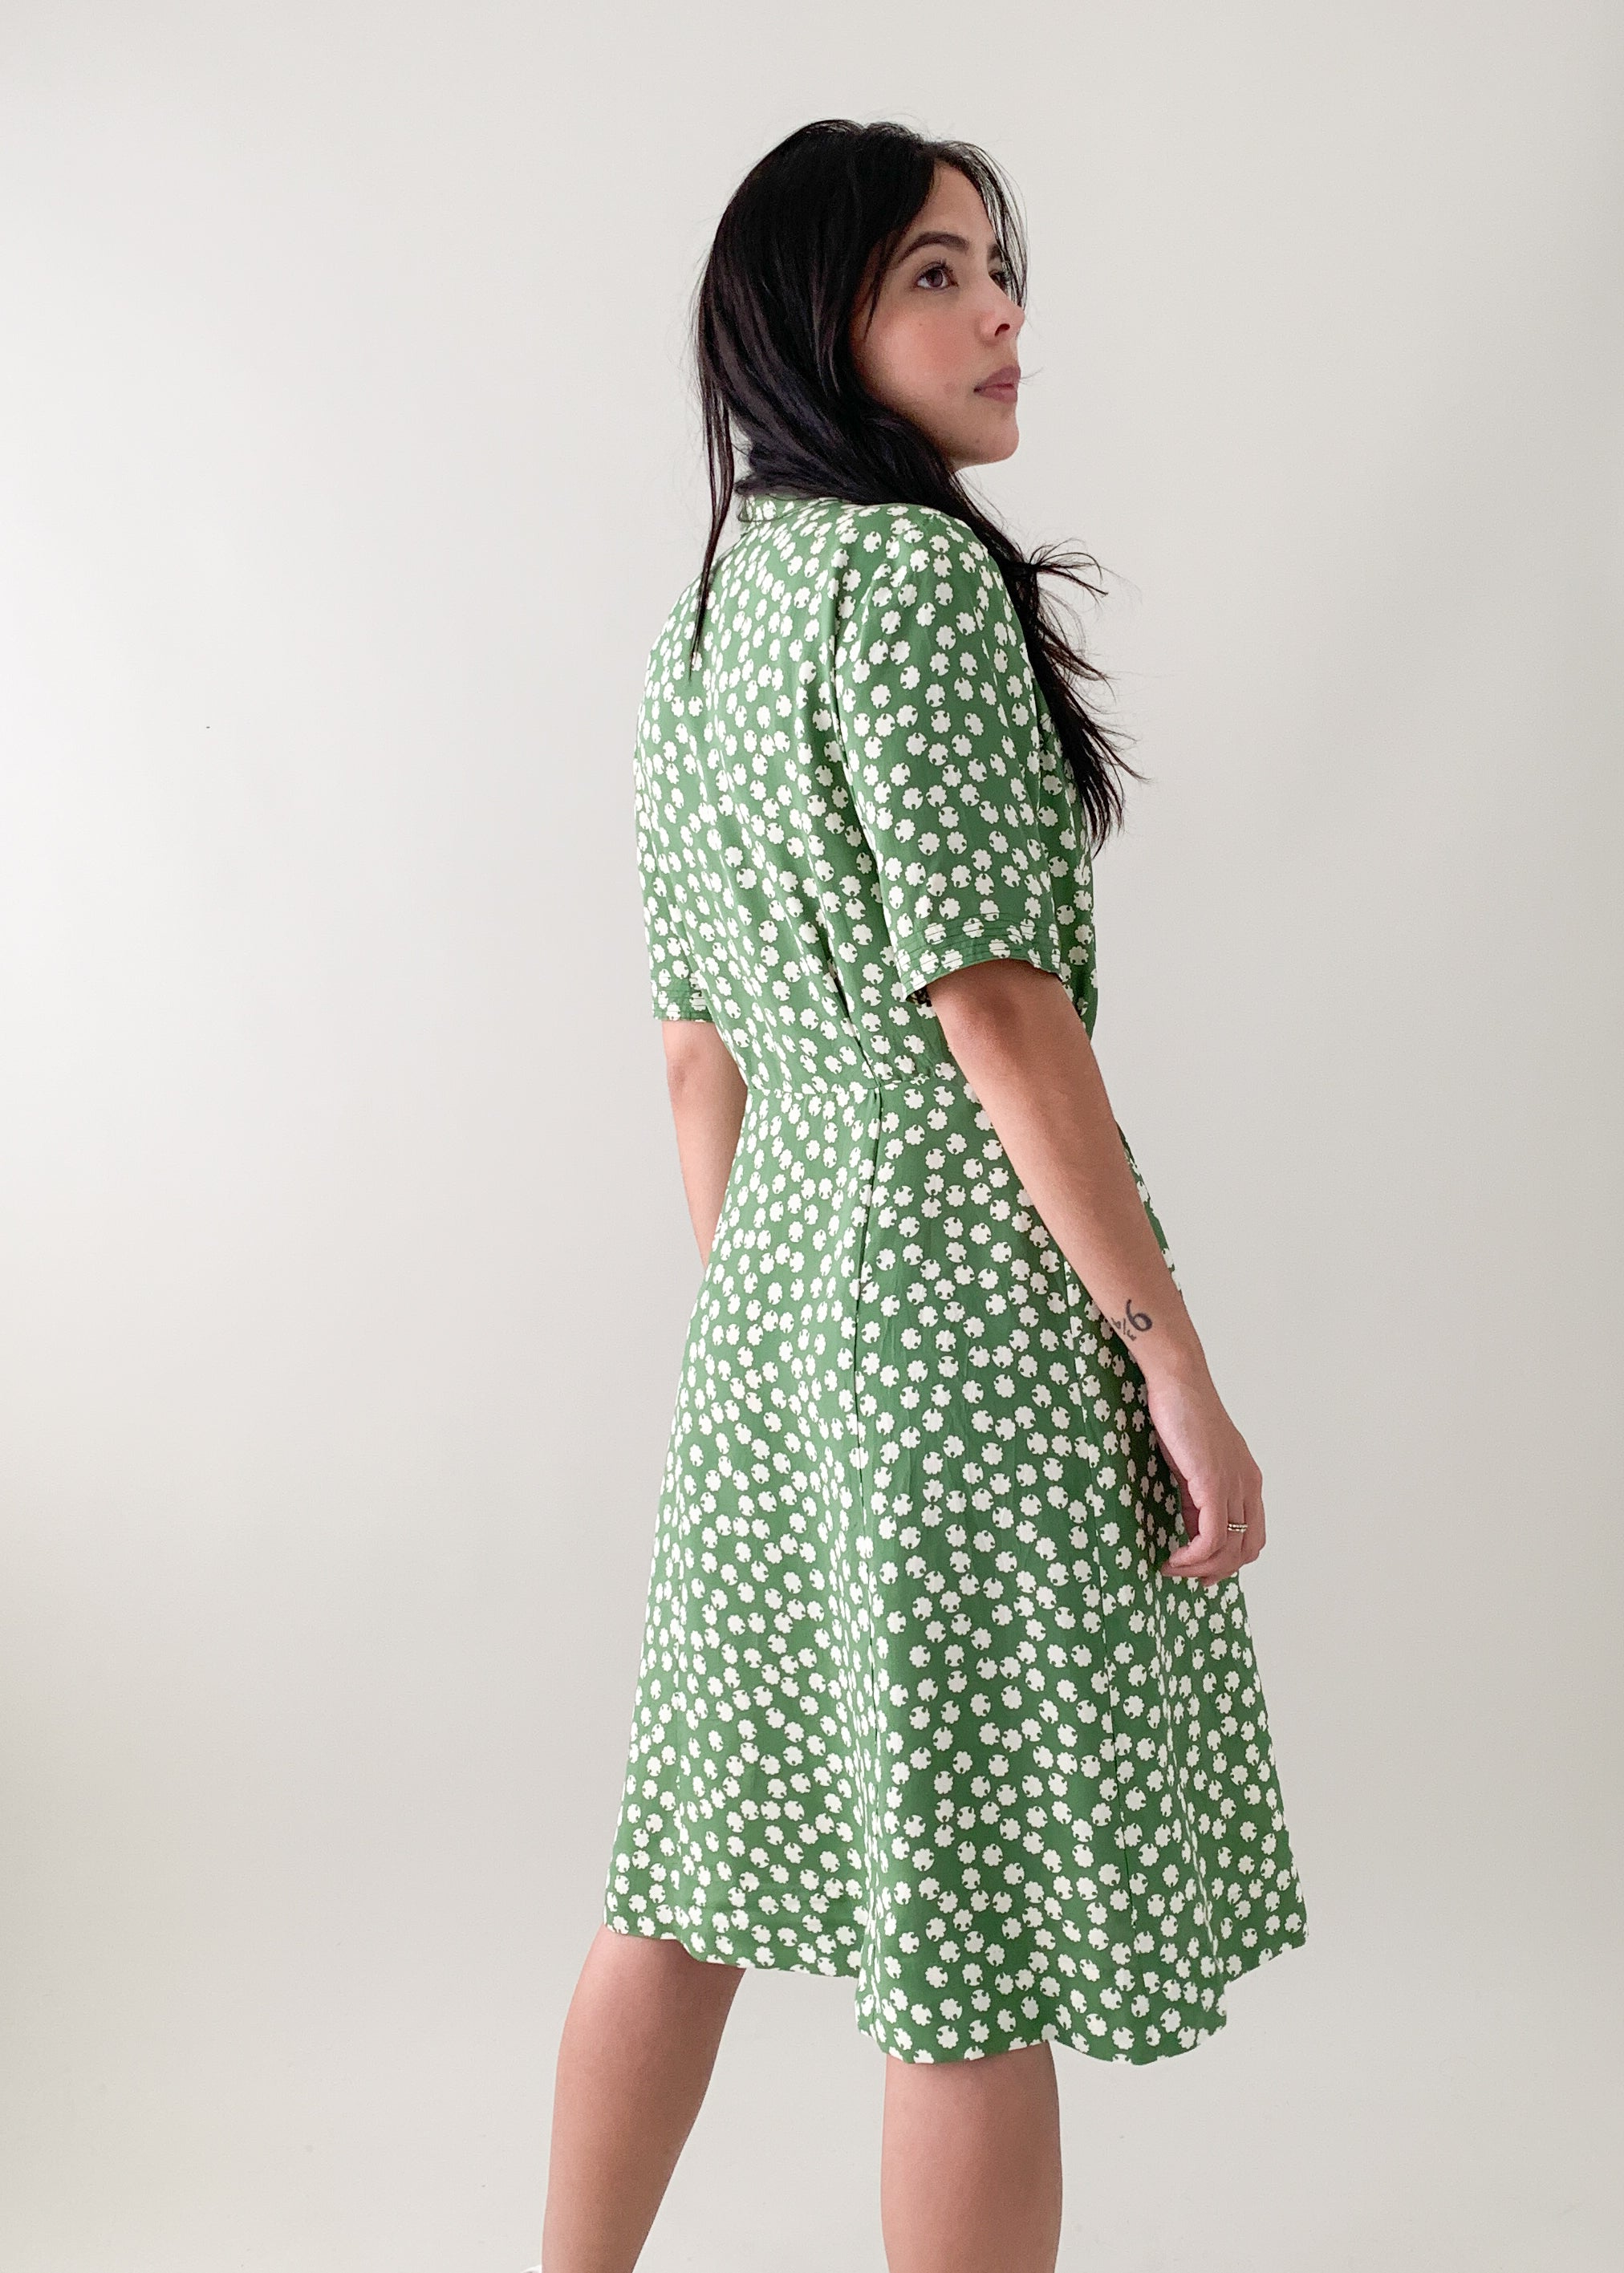 Vintage Early 1940s Rayon Dress - Raleigh Vintage